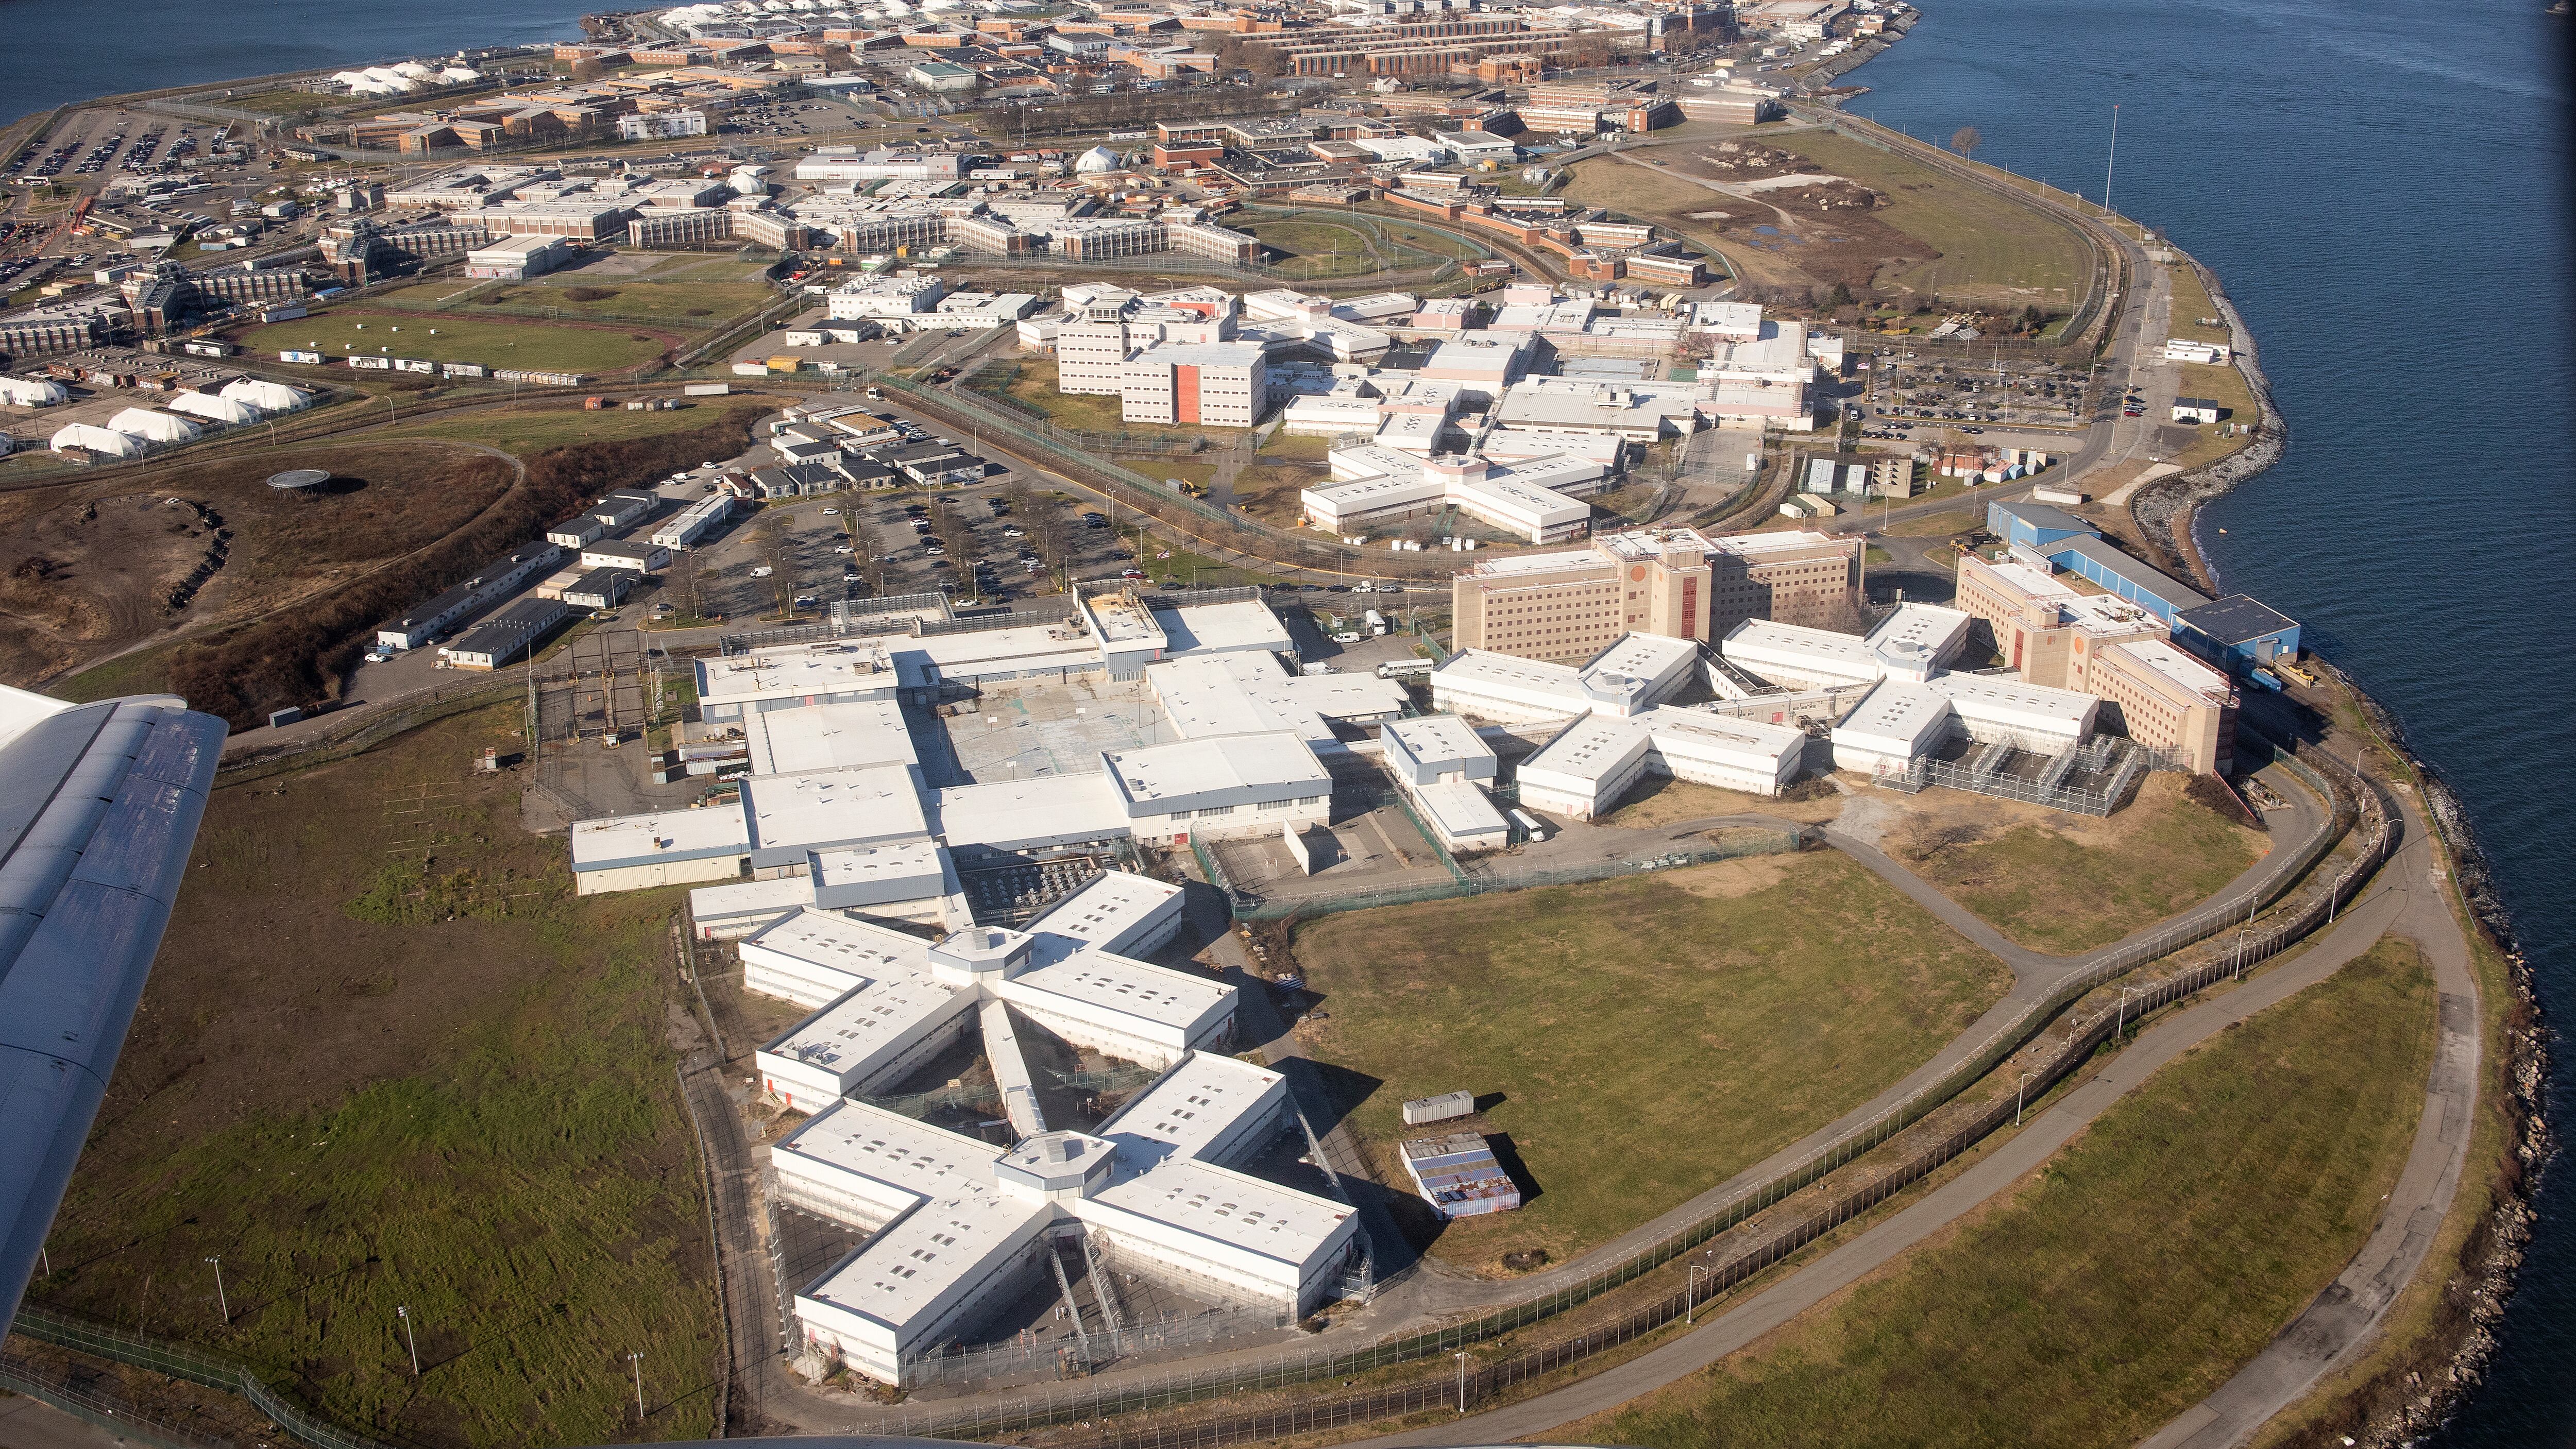 An arial view of Rikers Island with its dozens of white buildings scattered on the land.